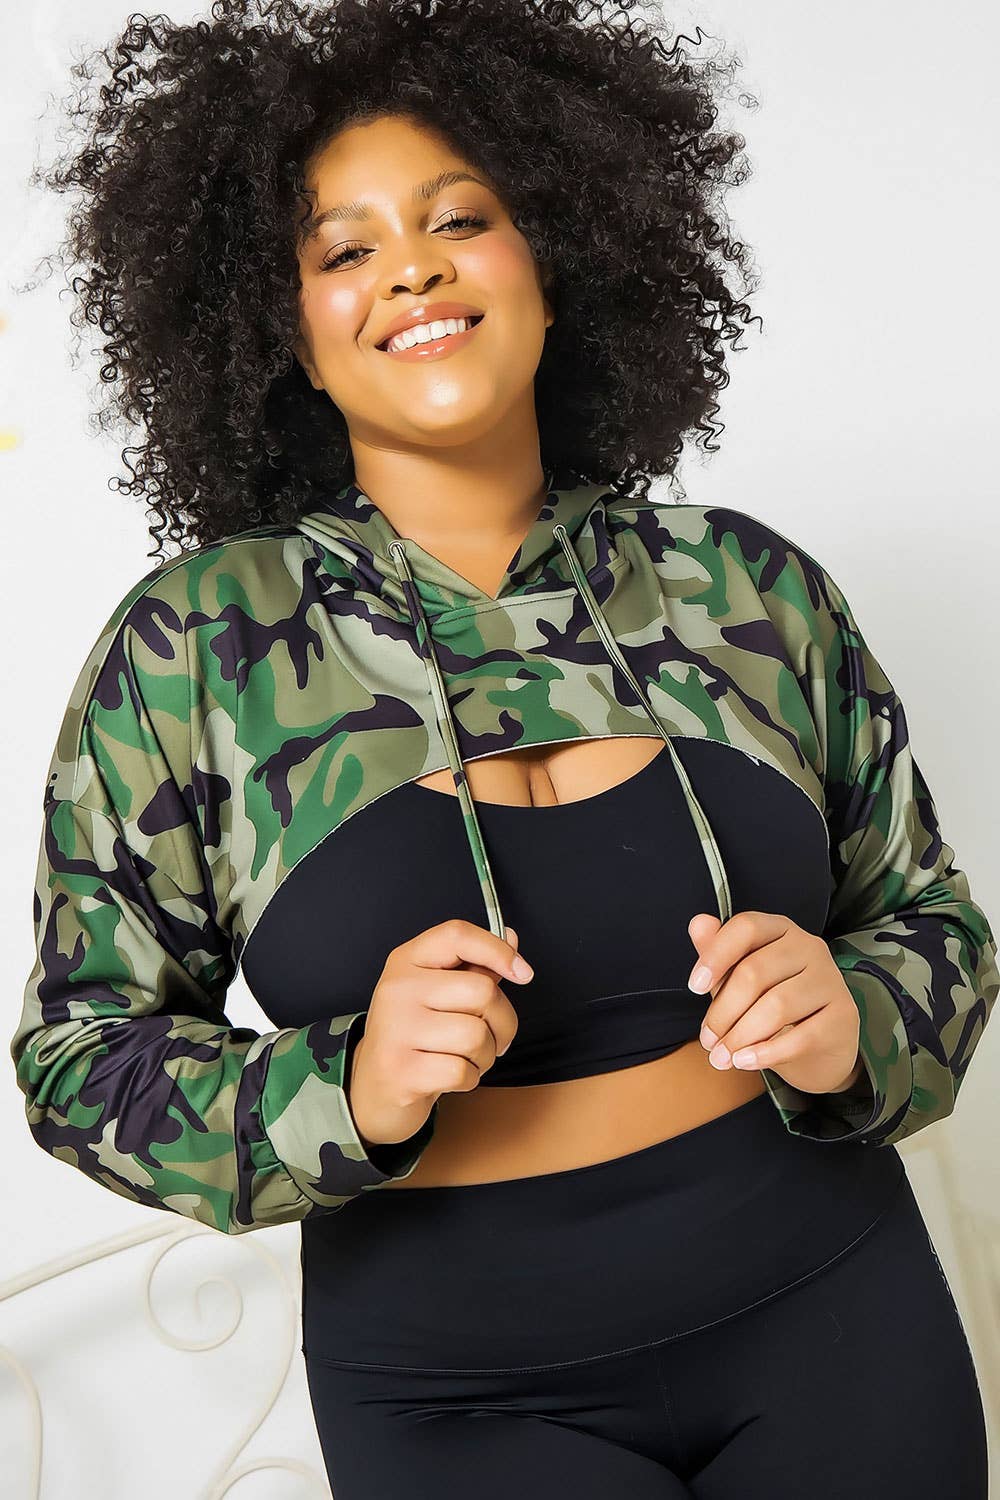 Arm Warmer Crop Hoodie Sweatshirt - Curvy Green
This warm shoulder cropped top drawstring hoodie sweater is medium weight smooth, stretchy and breathable. Vibrant camo color looks perfect for any season. Looks great with jeans, leggings, shorts, skorts and skirts!
Arm Warmer Crop Hoodie Sweatshirt - Curvy Green
This warm shoulder cropped top drawstring hoodie sweater is medium weight smooth, stretchy and breathable. Vibrant camo color looks perfect for any season.
08282021001

$36.99
$36.99
$36.99
activewea